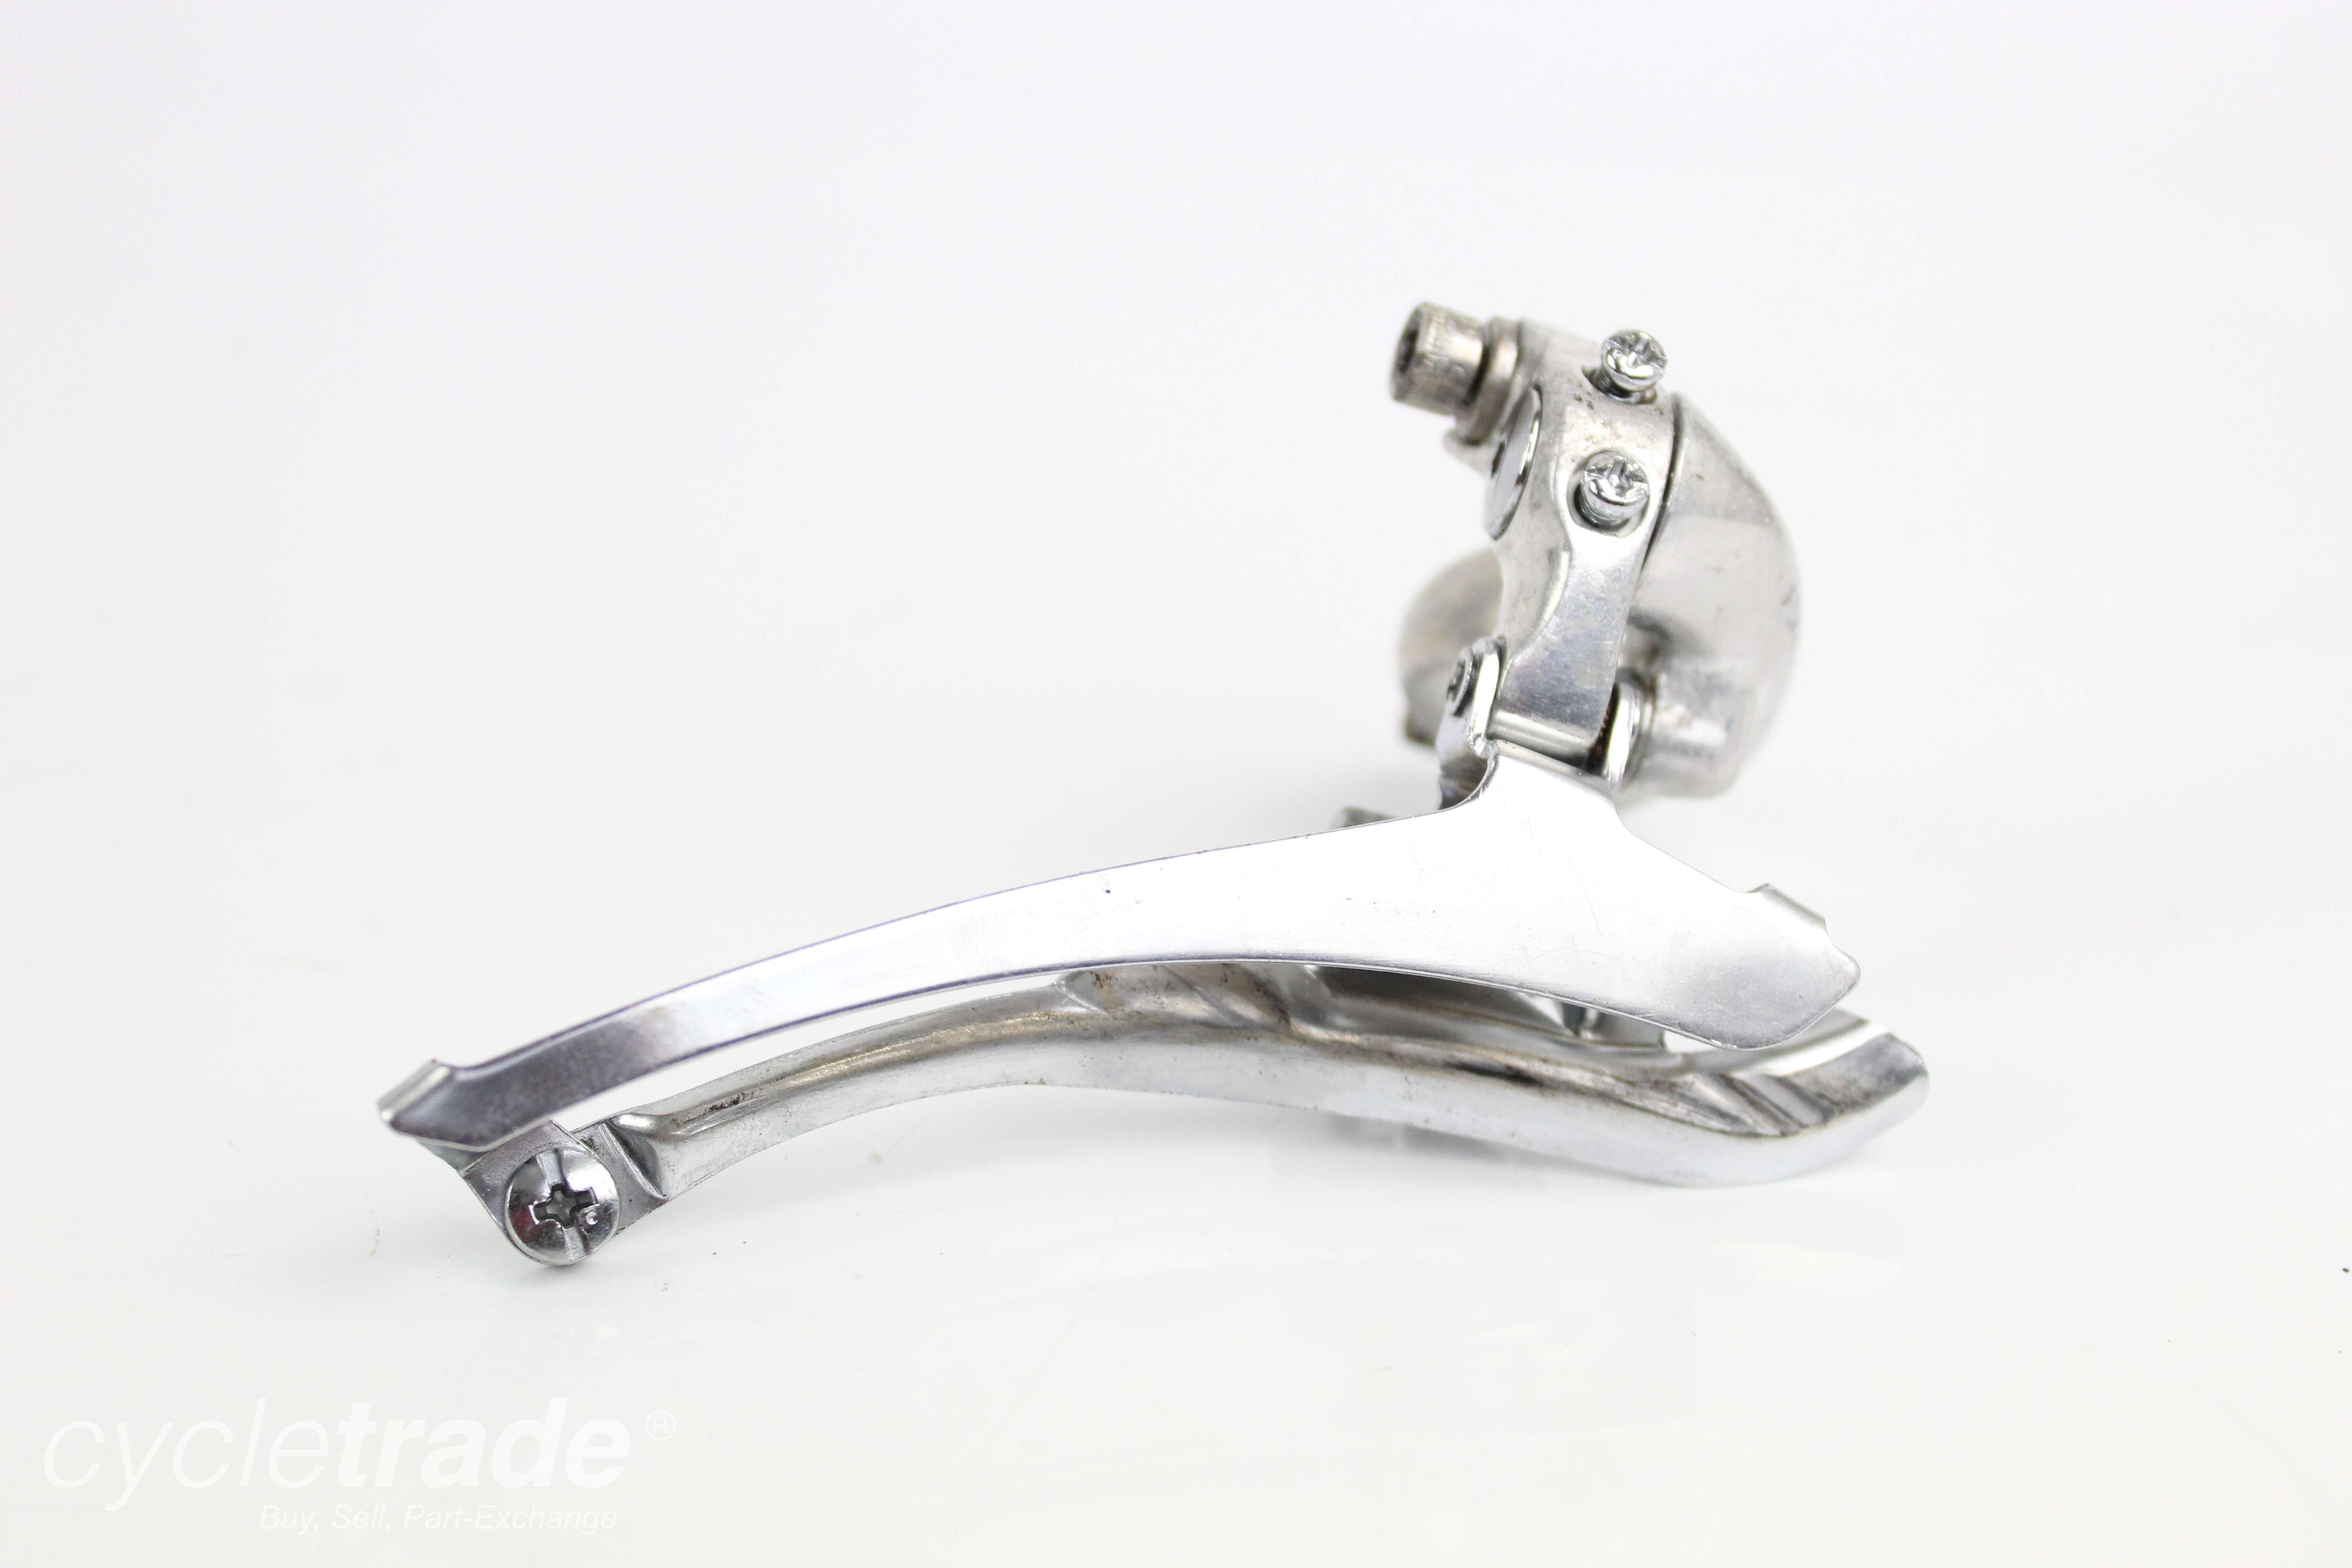 Front Derailleur- Shimano RX100 FD-A551 2x8 Speed 28.6mm Clamp-On - Grade C+